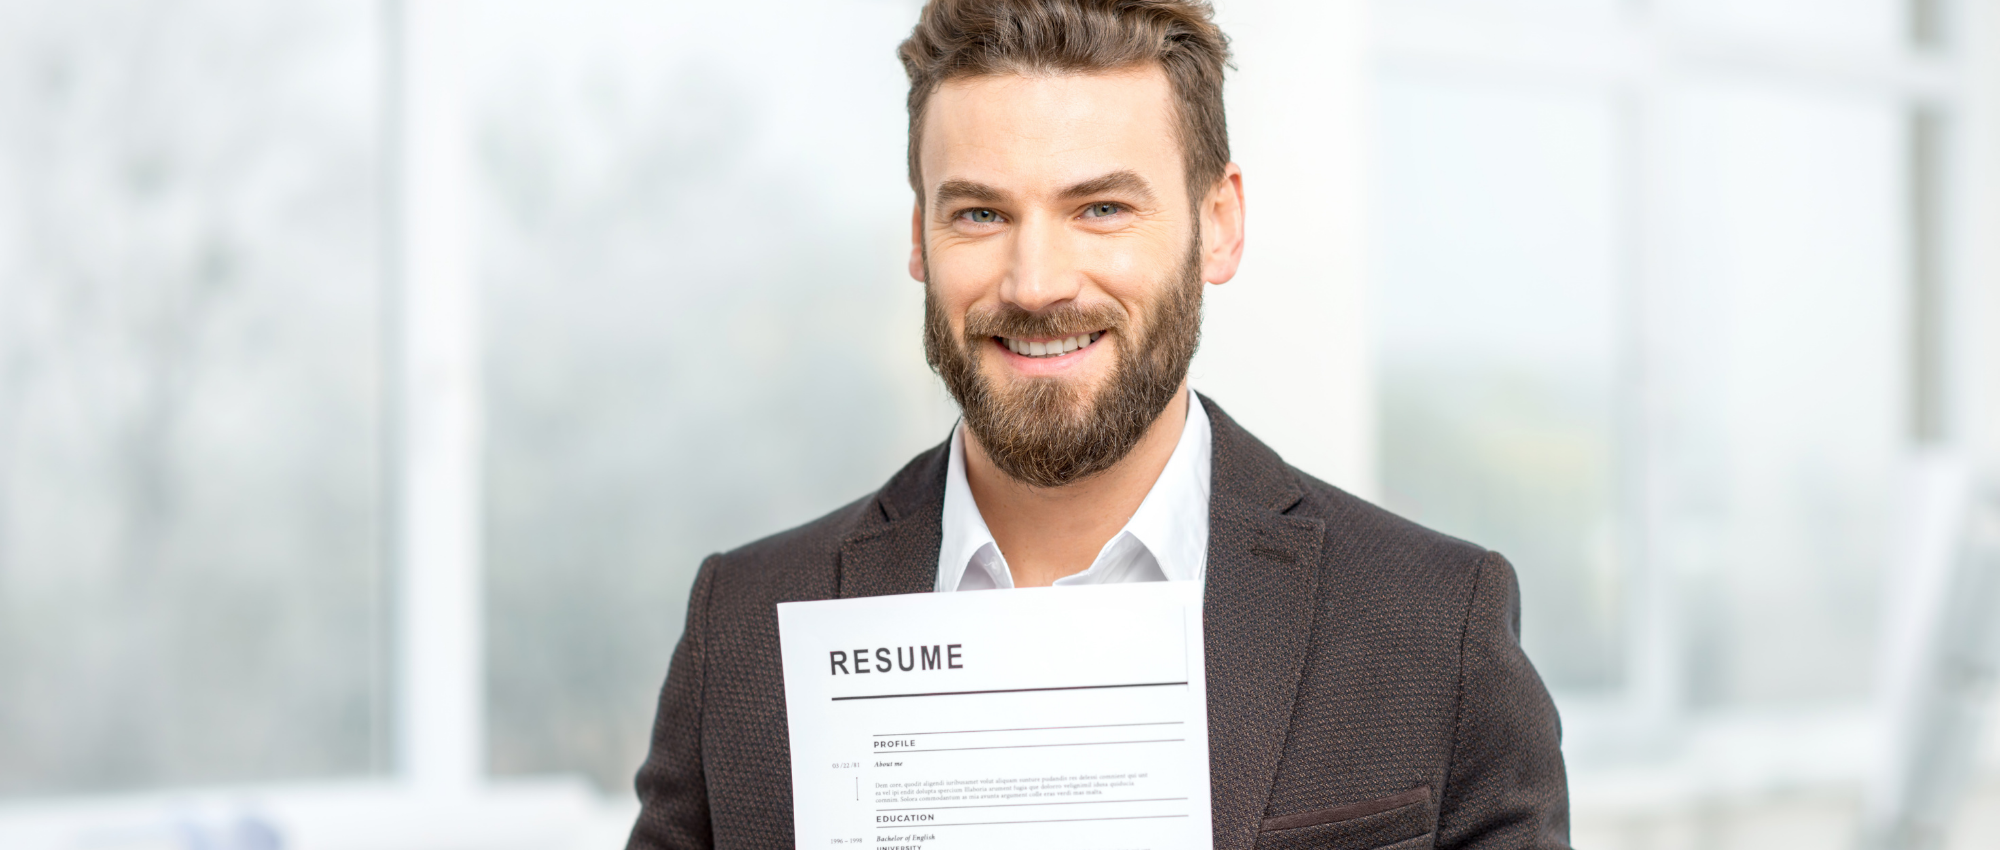 writing an effective resume and cover letter